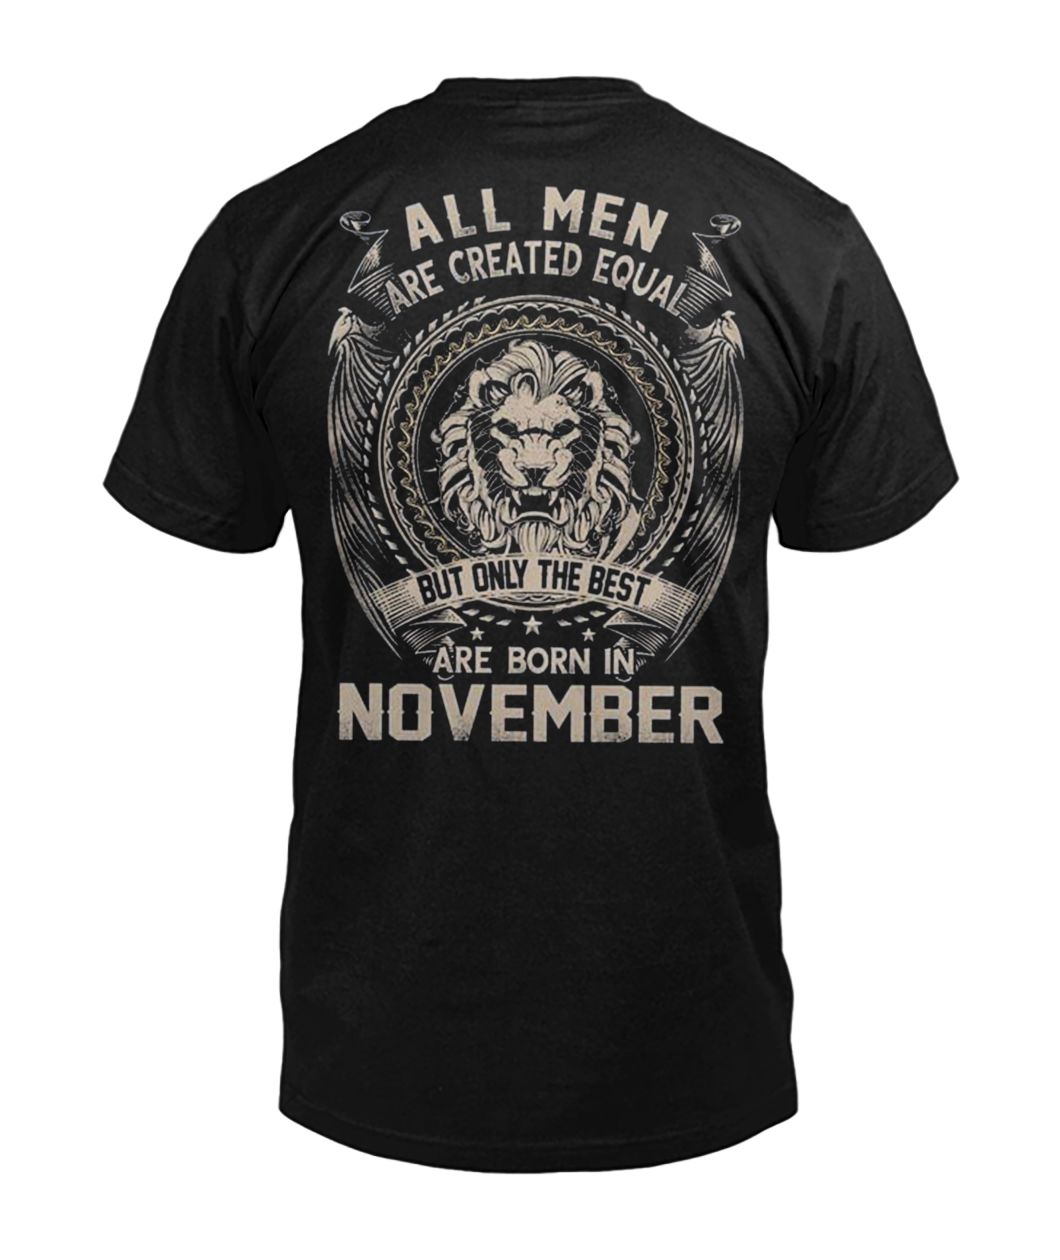 All men created equal but the best are born in november mens v-neck